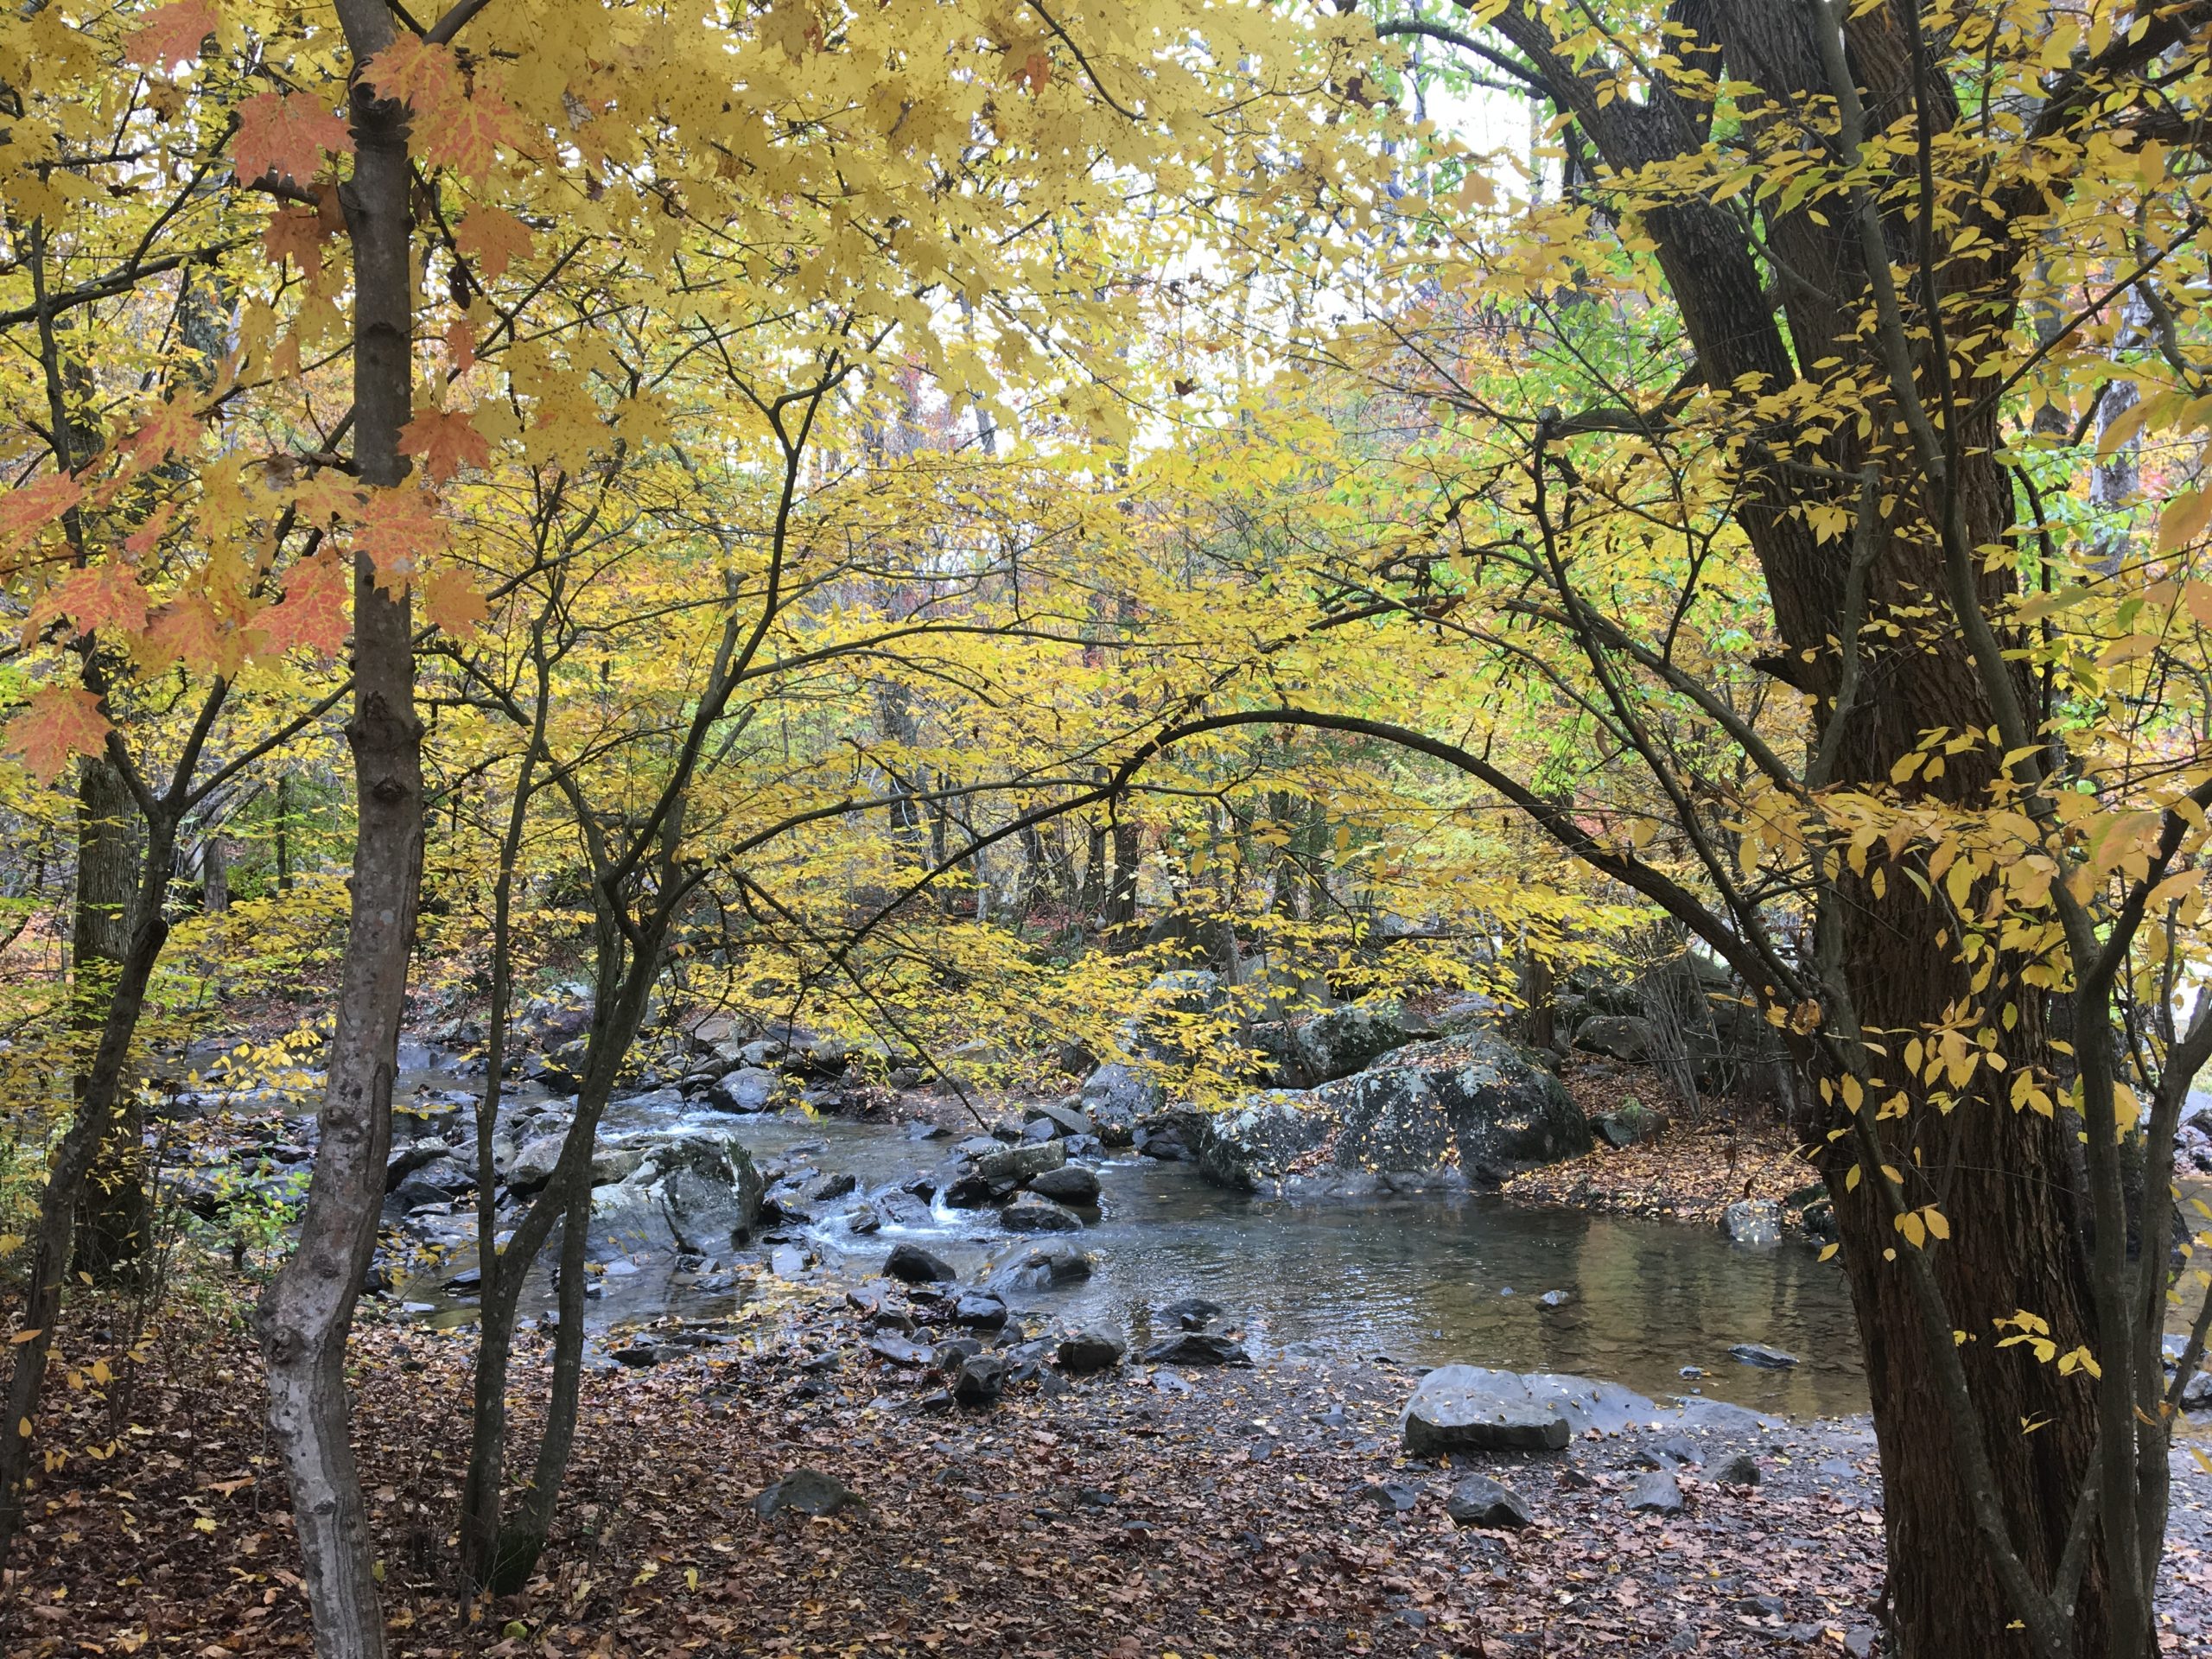 trees with yellow leaves by a creek